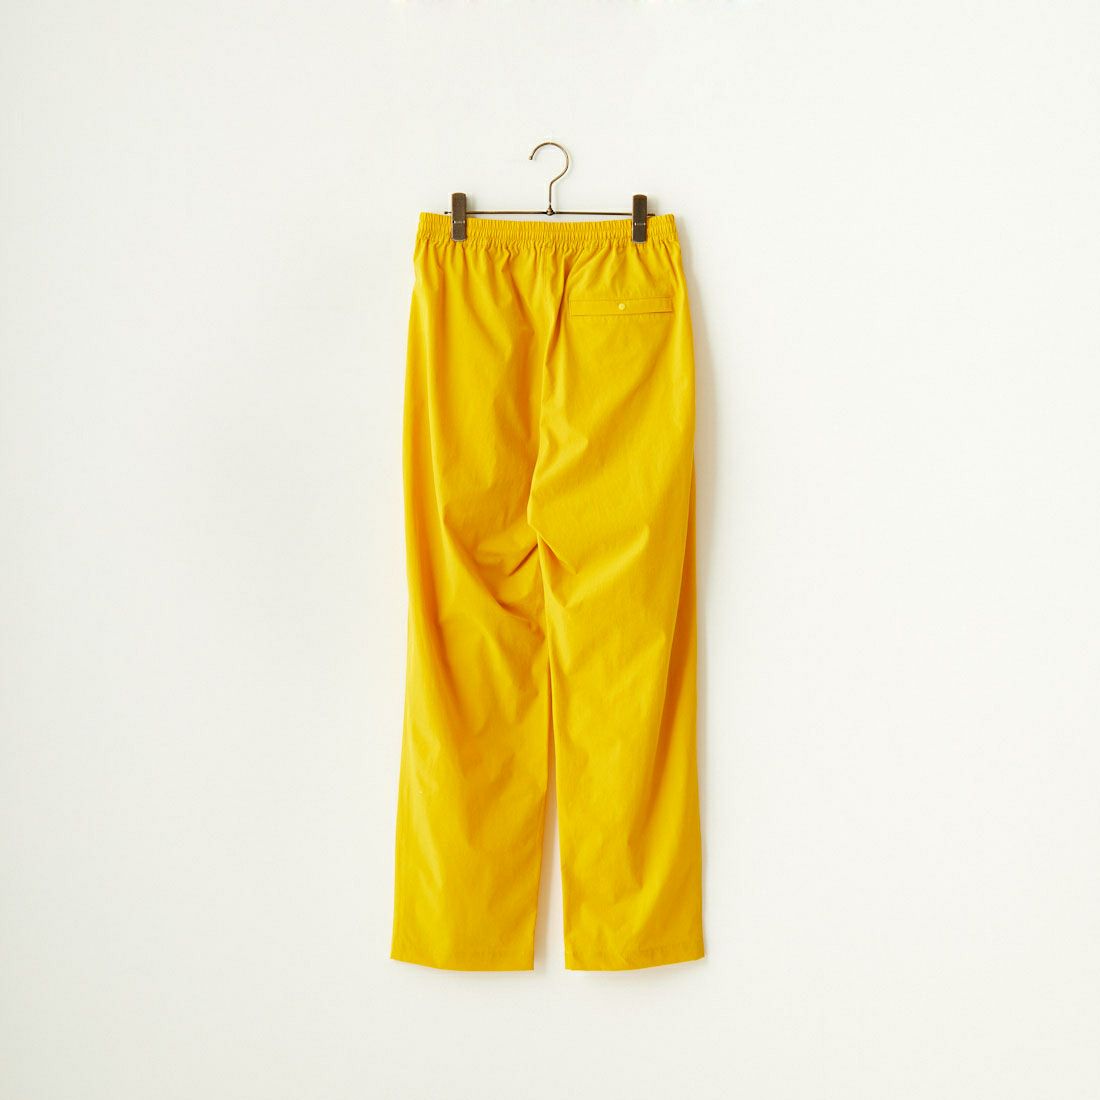 Jeans Factory Clothes [ジーンズファクトリークローズ] 7DAYSナイロンイージーパンツ [IN6-PT-4]YELLOW